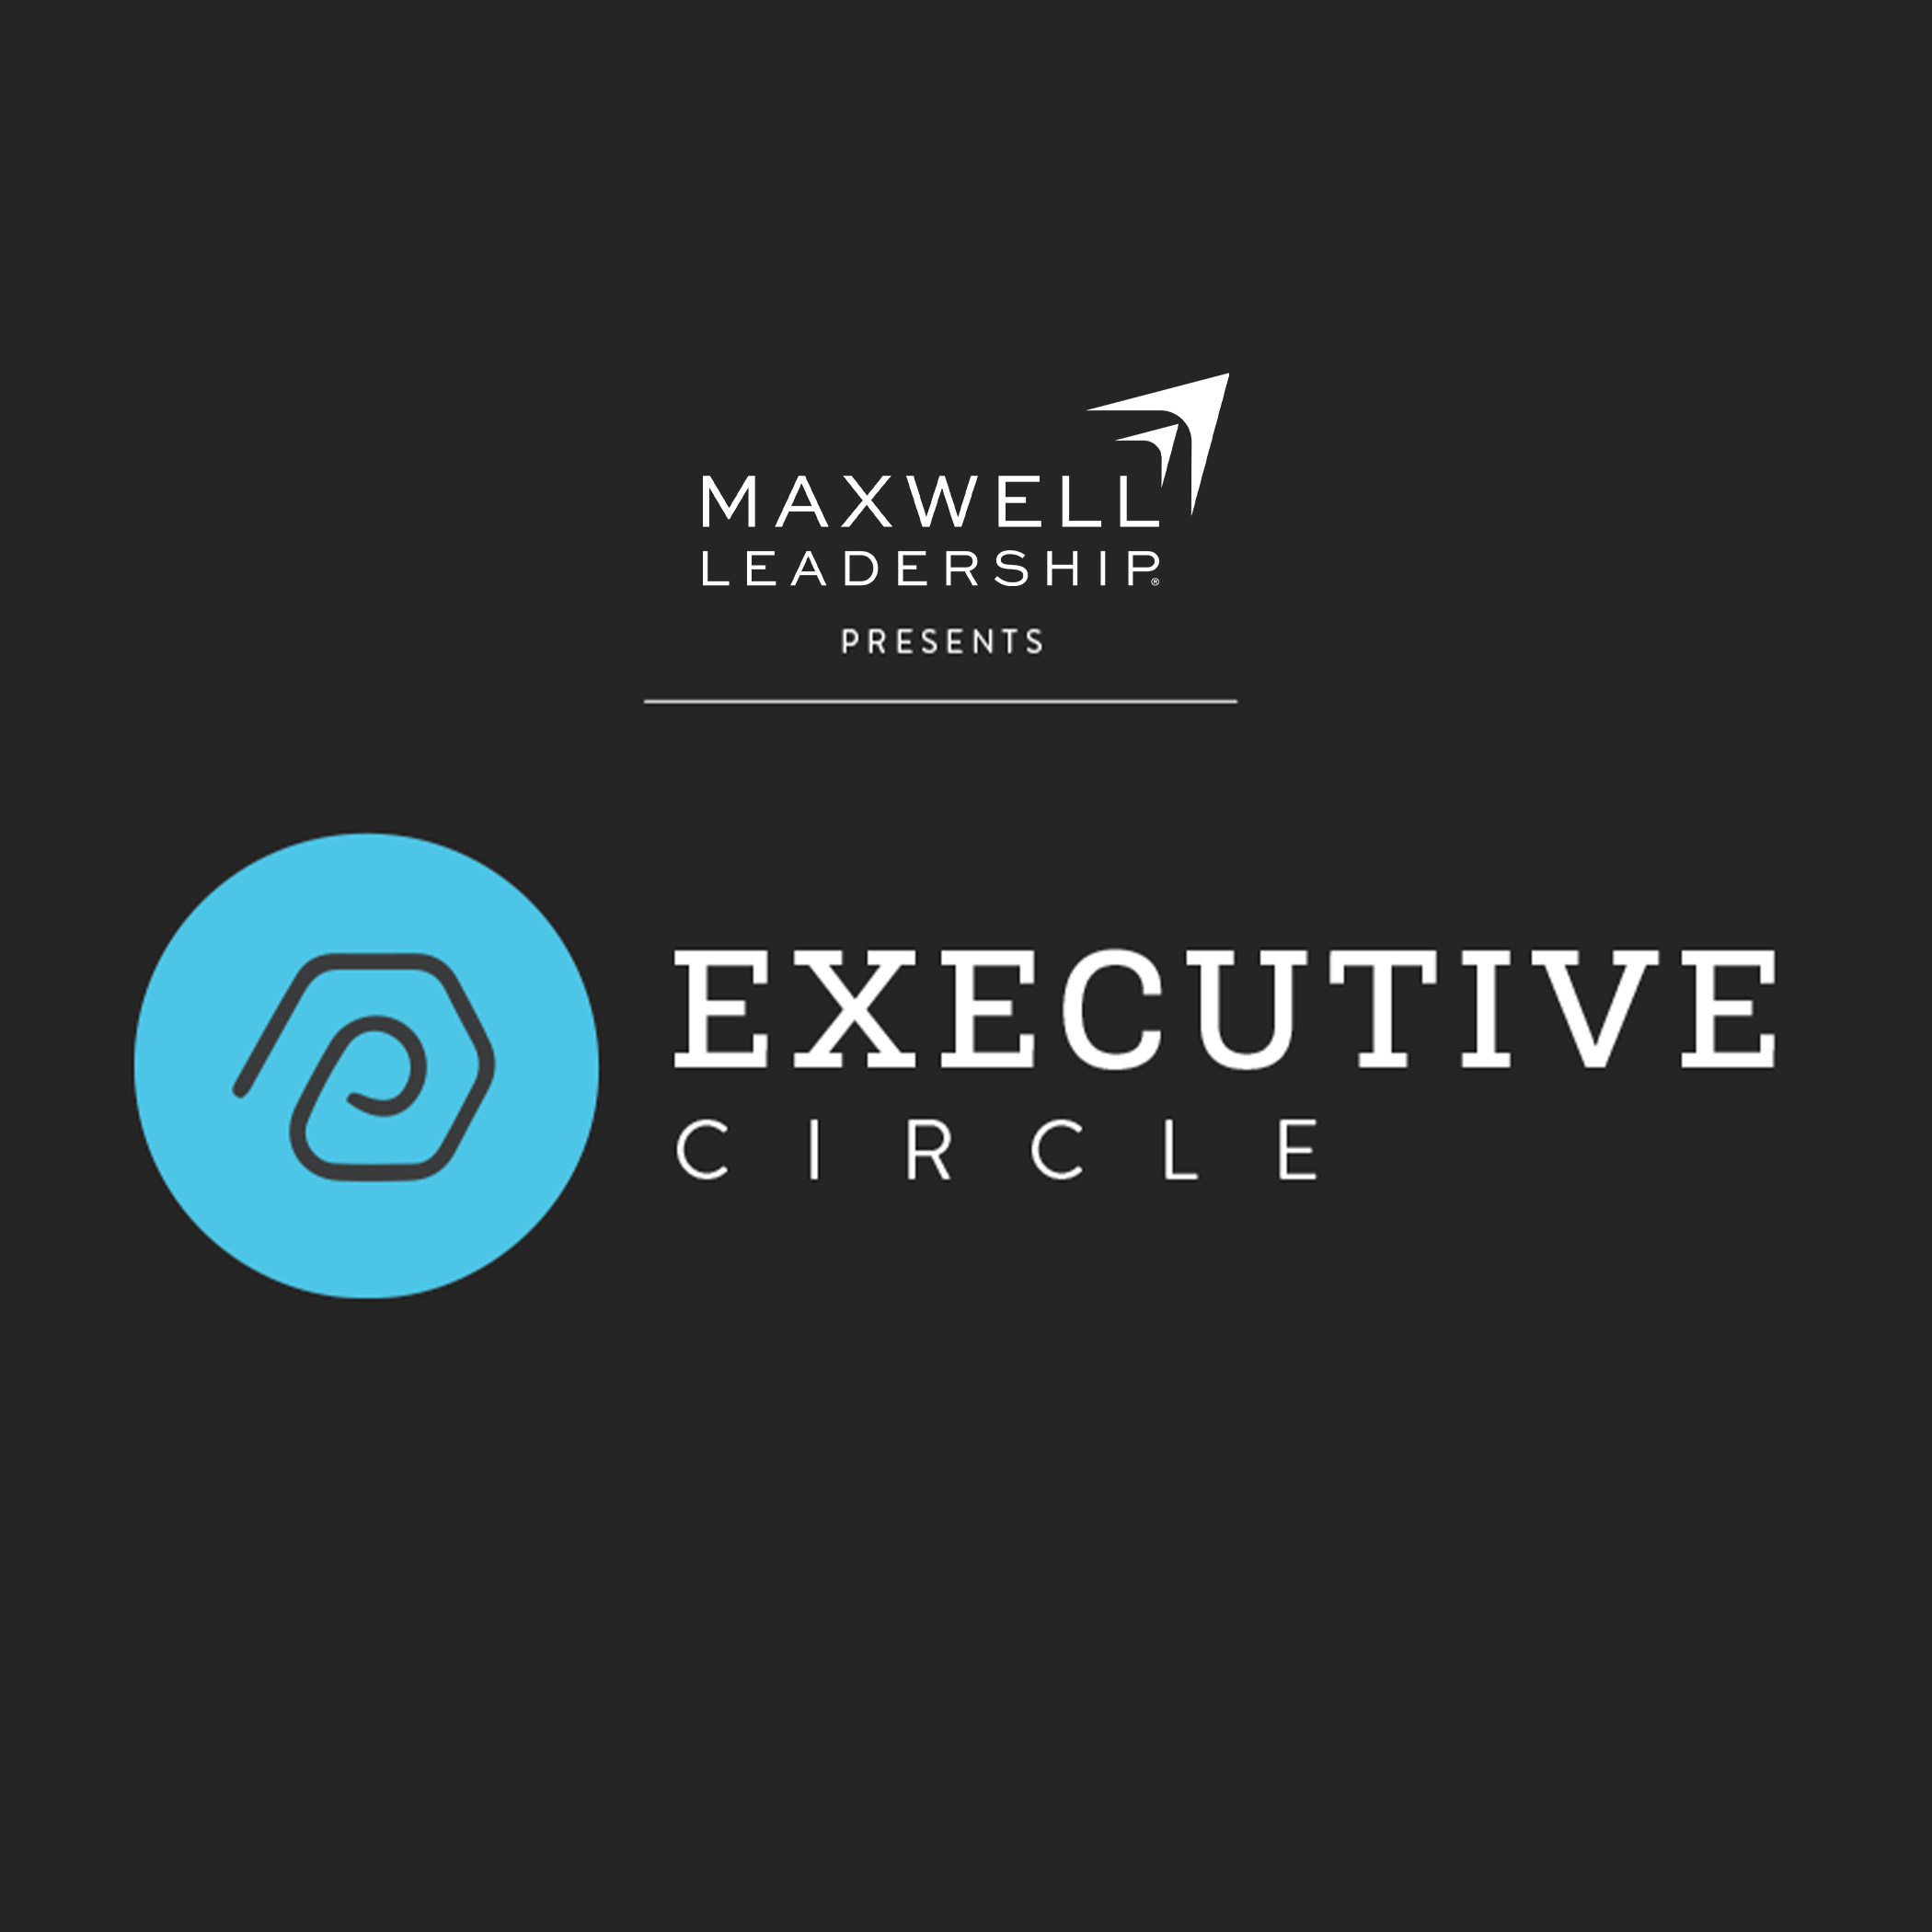 What is the Executive Circle?